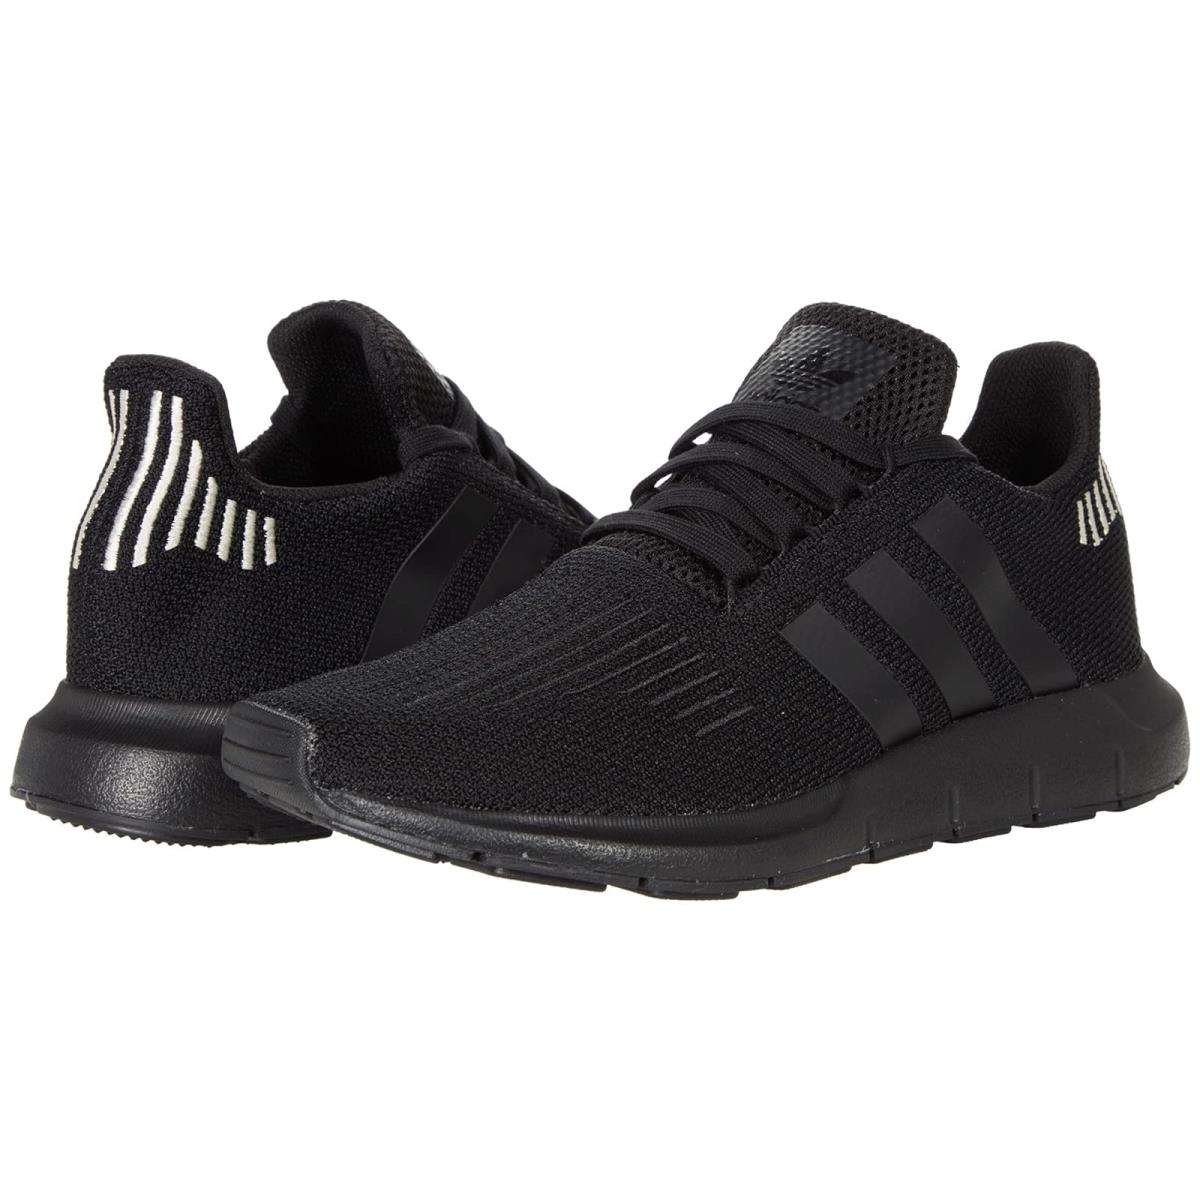 Woman`s Sneakers Athletic Shoes Adidas Originals Swift Run W Core Black/Core Black/Core Black